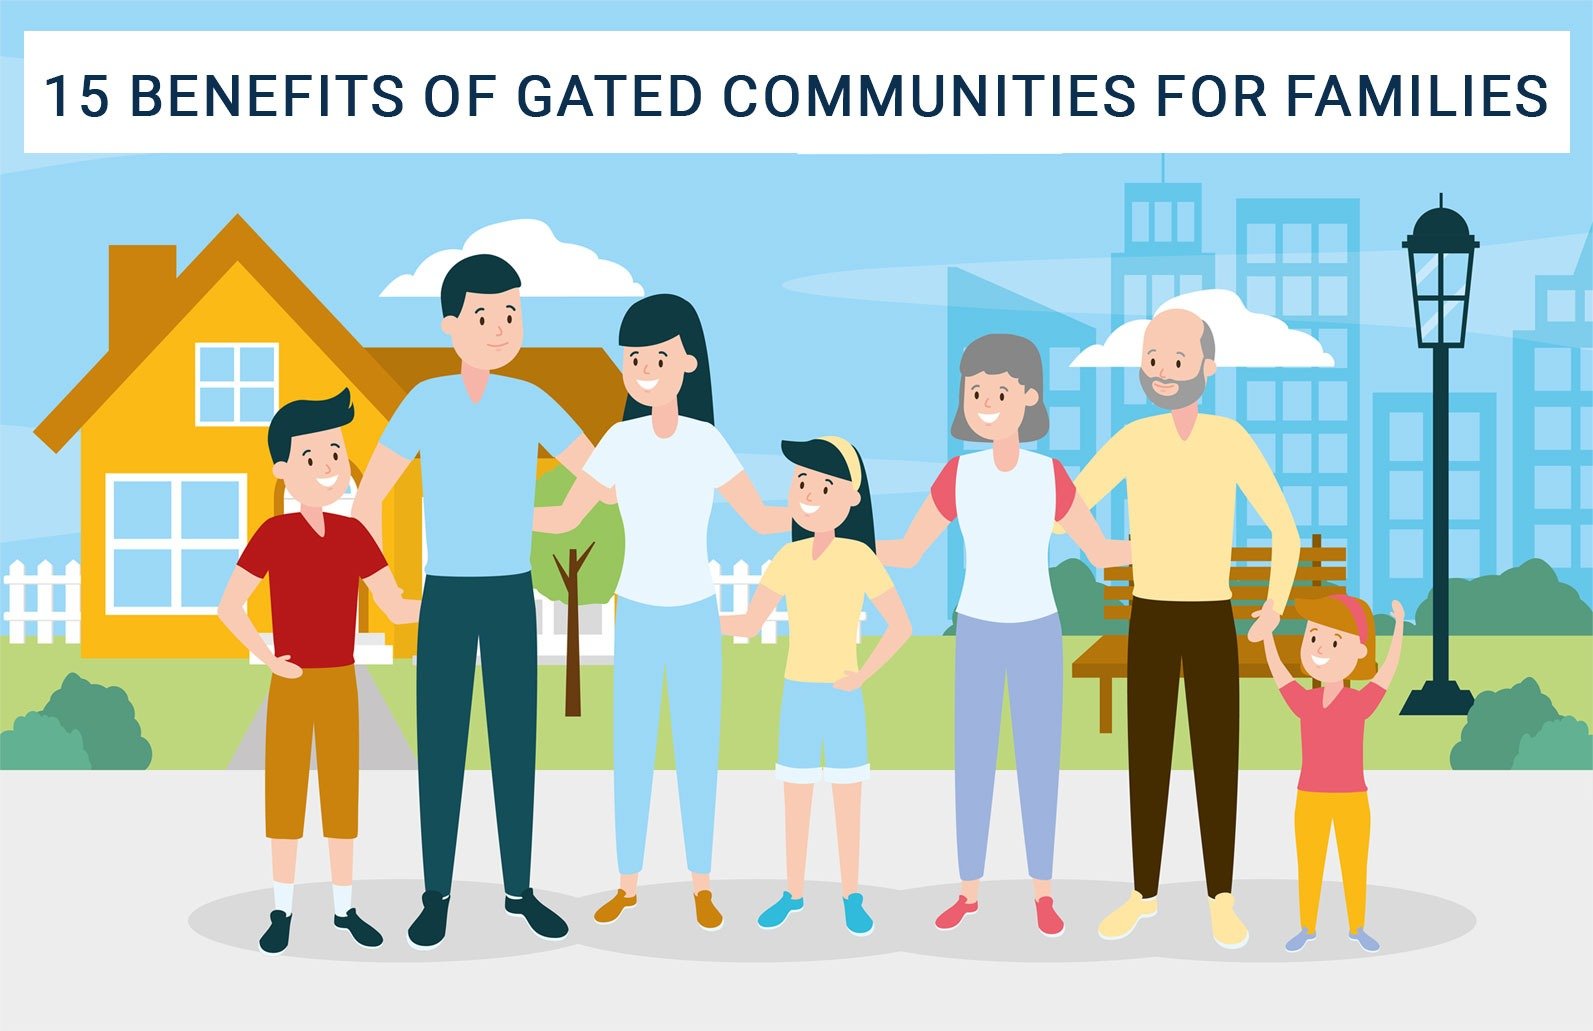 15 Benefits of Gated Communities for Families